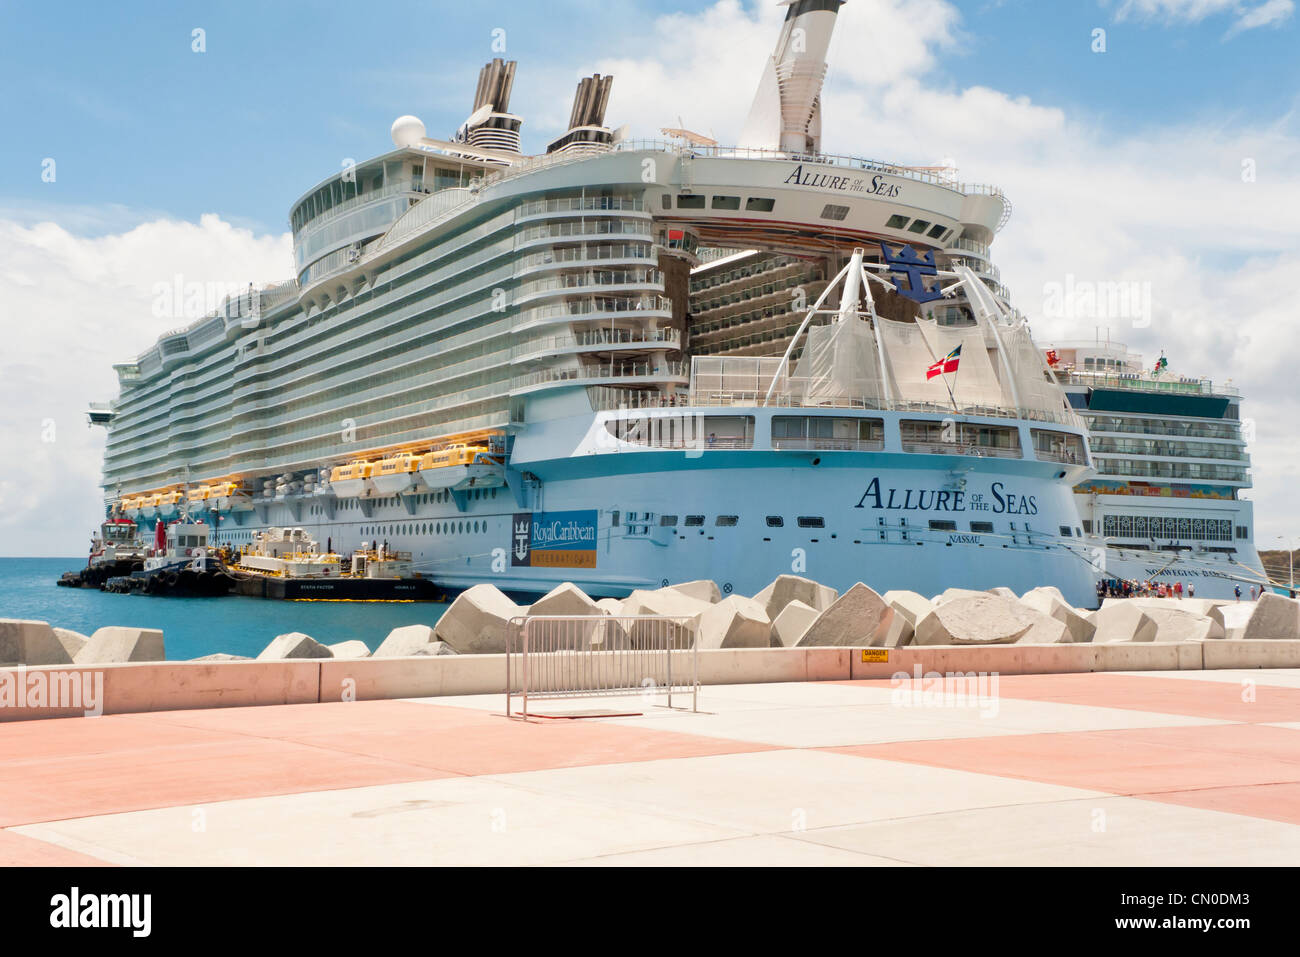 The stern of the largest cruise ship in the world, the Allure of the Seas, at dock in Saint Maartin. Stock Photo